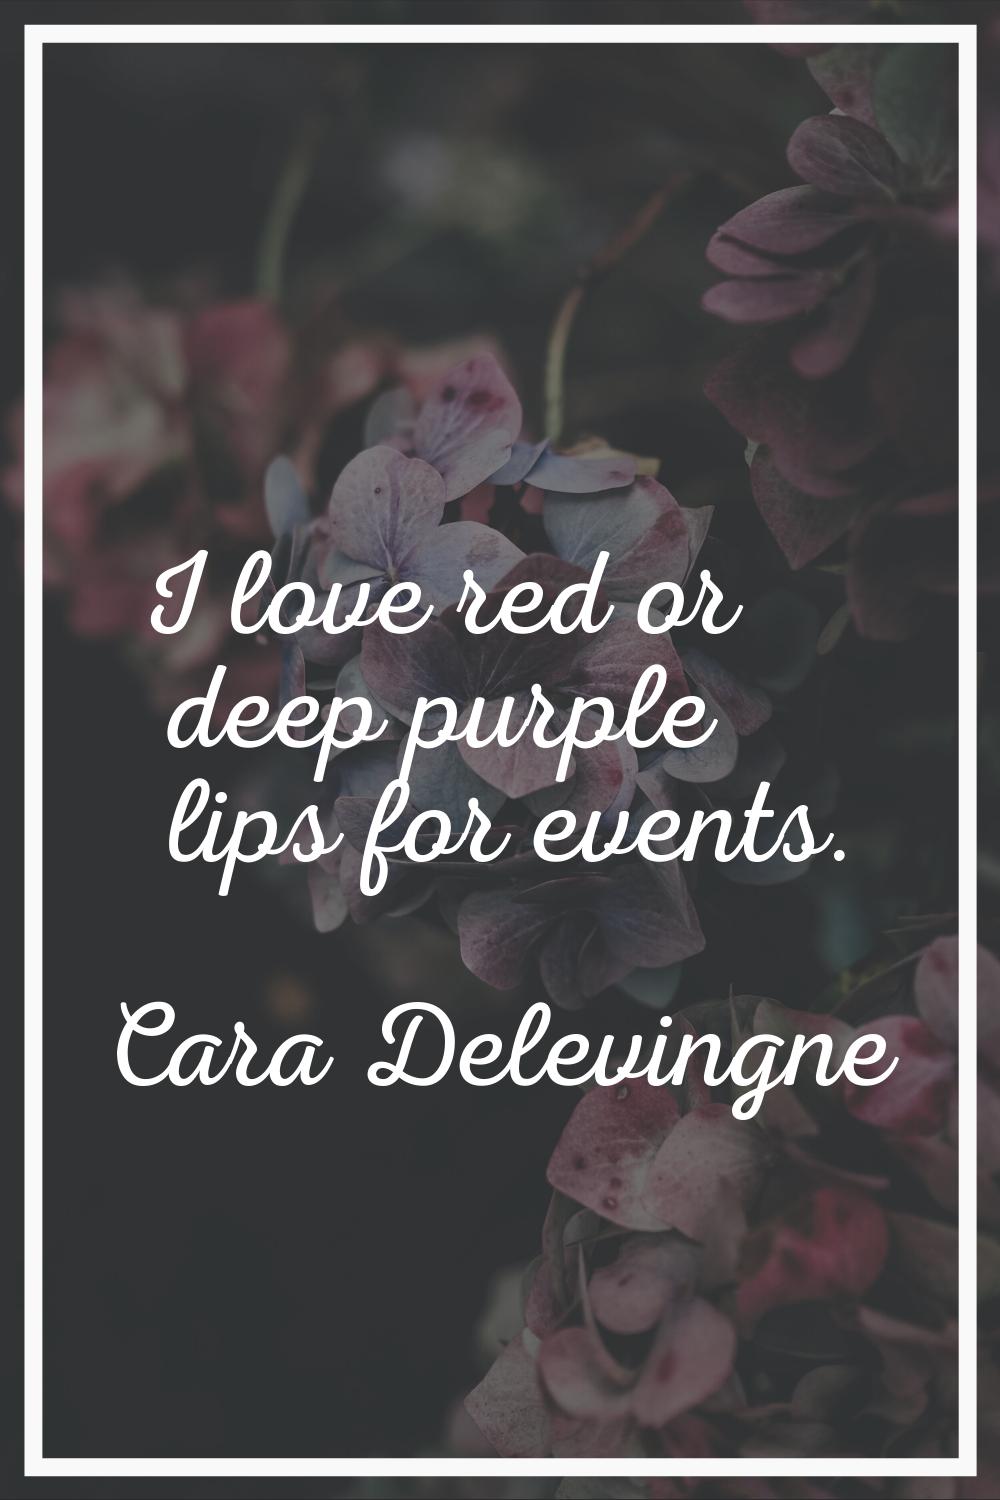 I love red or deep purple lips for events.